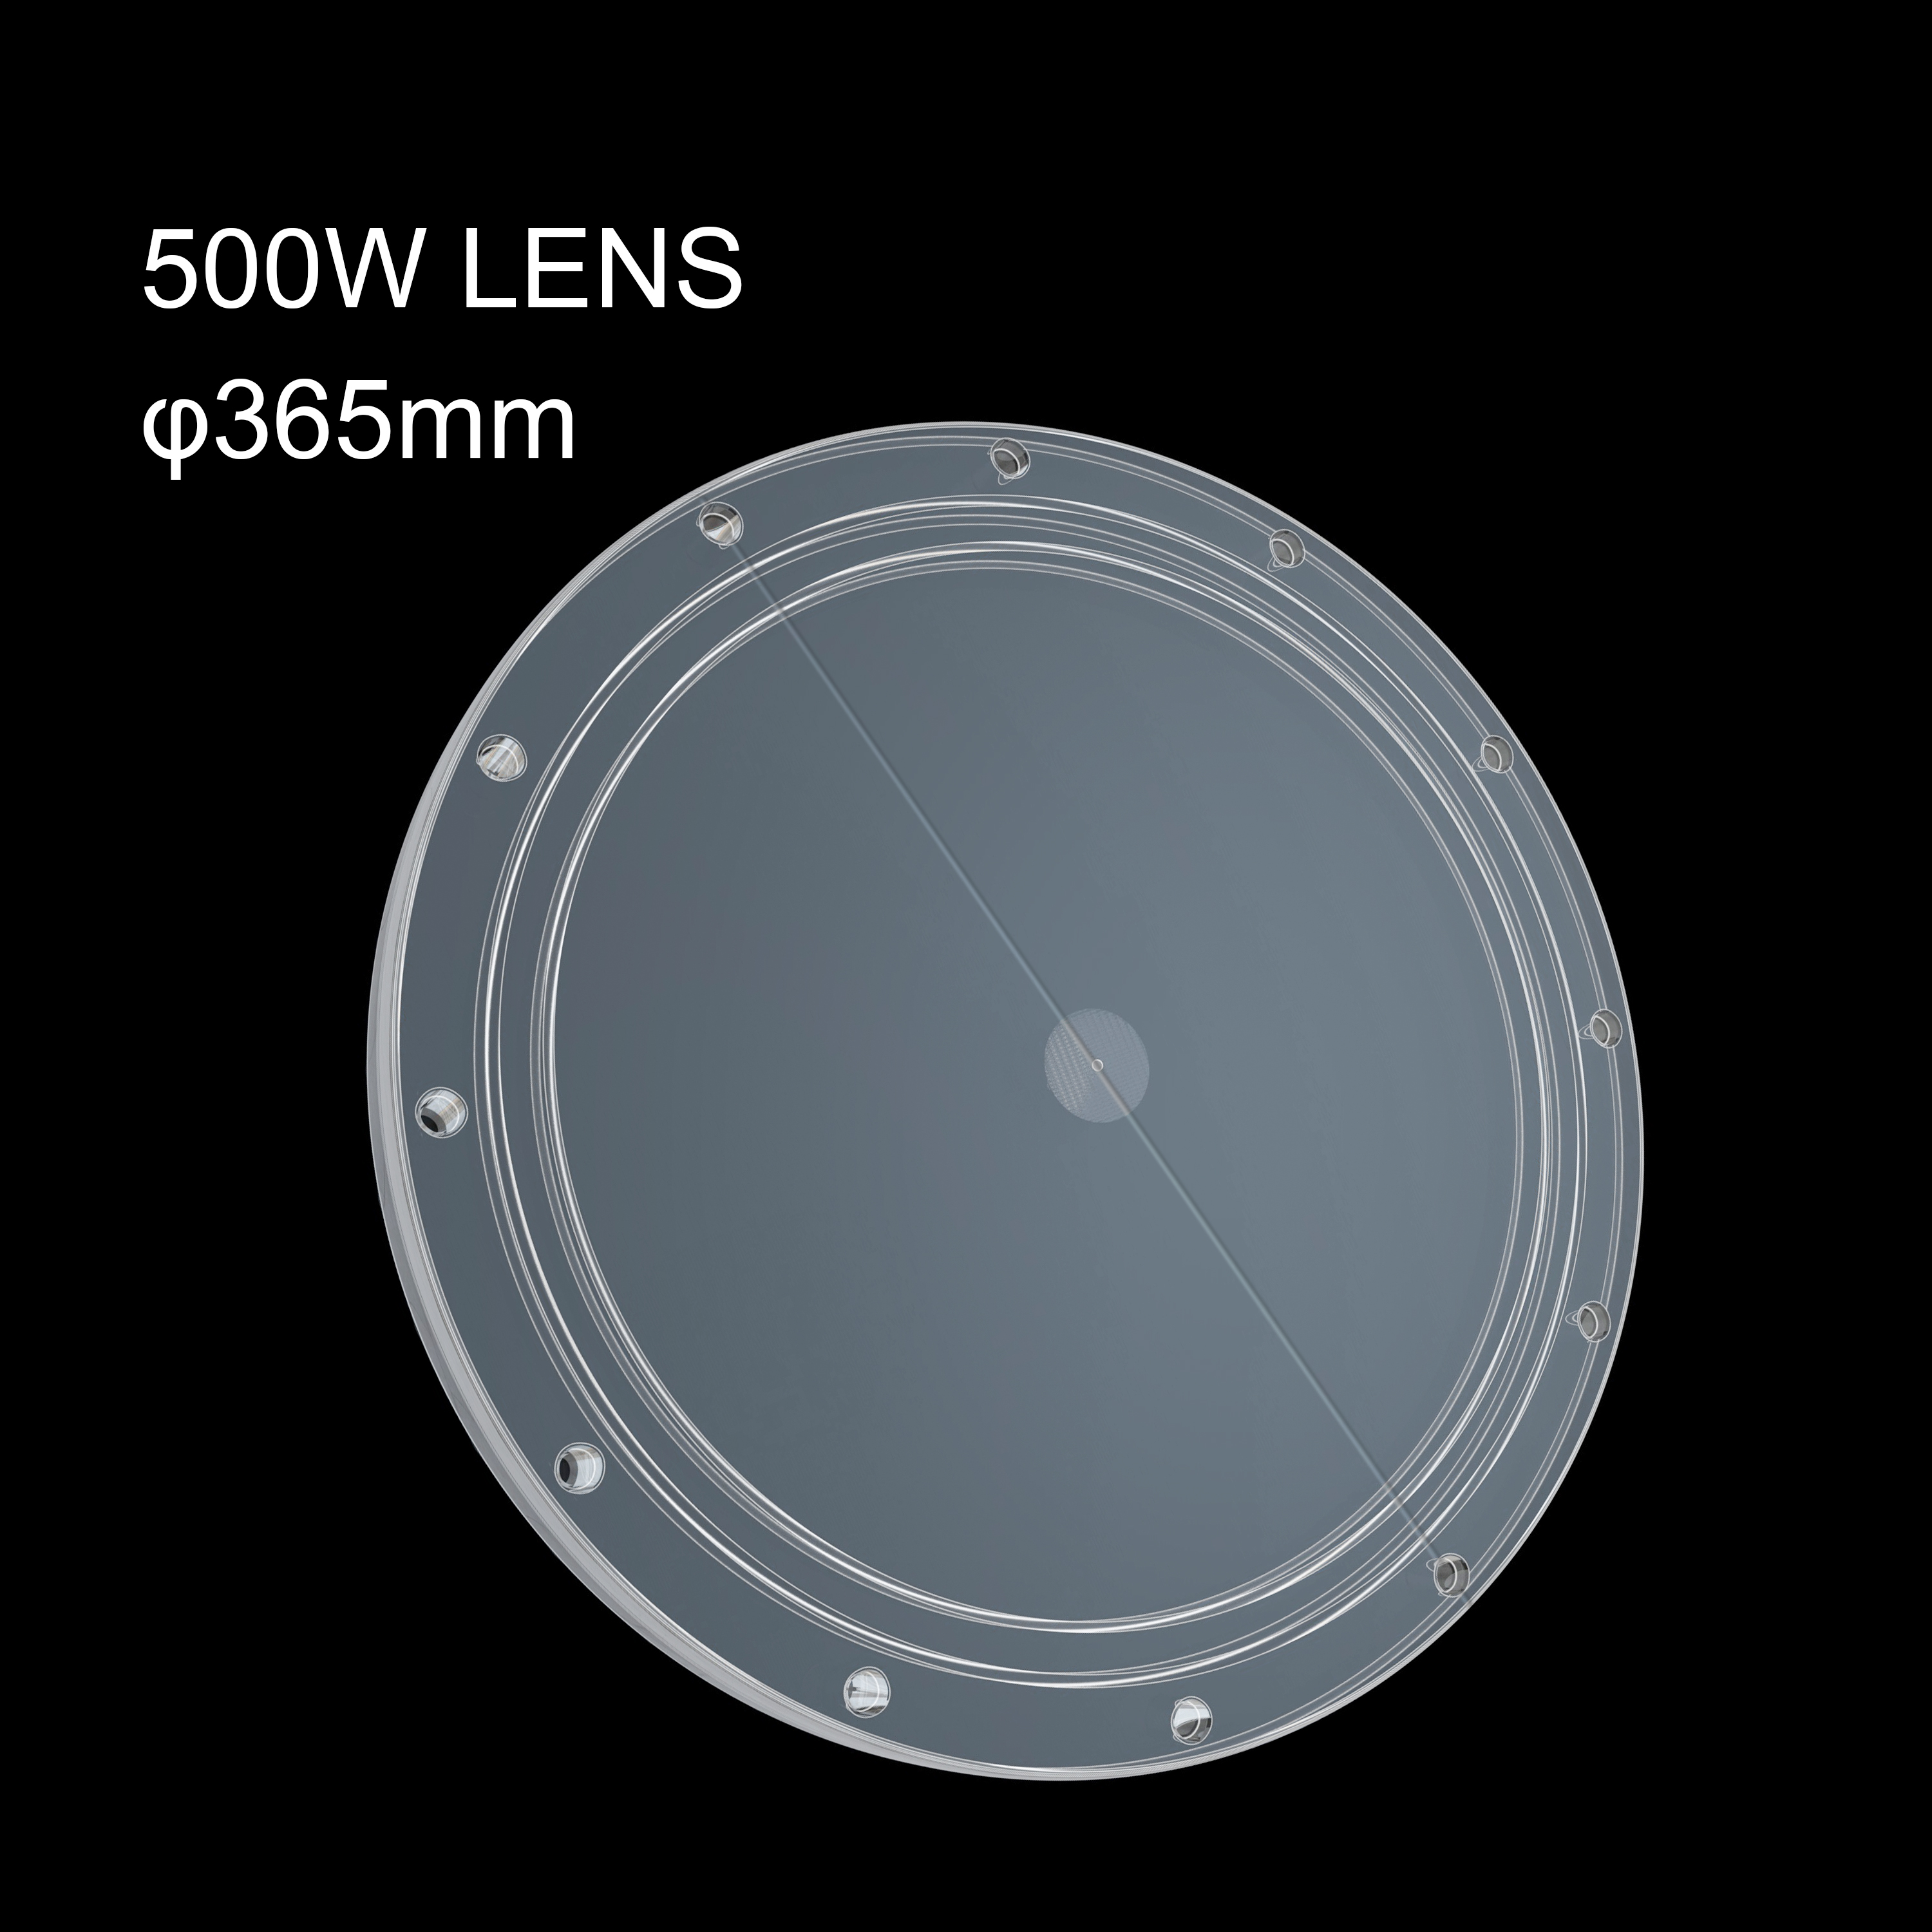 LED 500 W UFO Lens Replacement